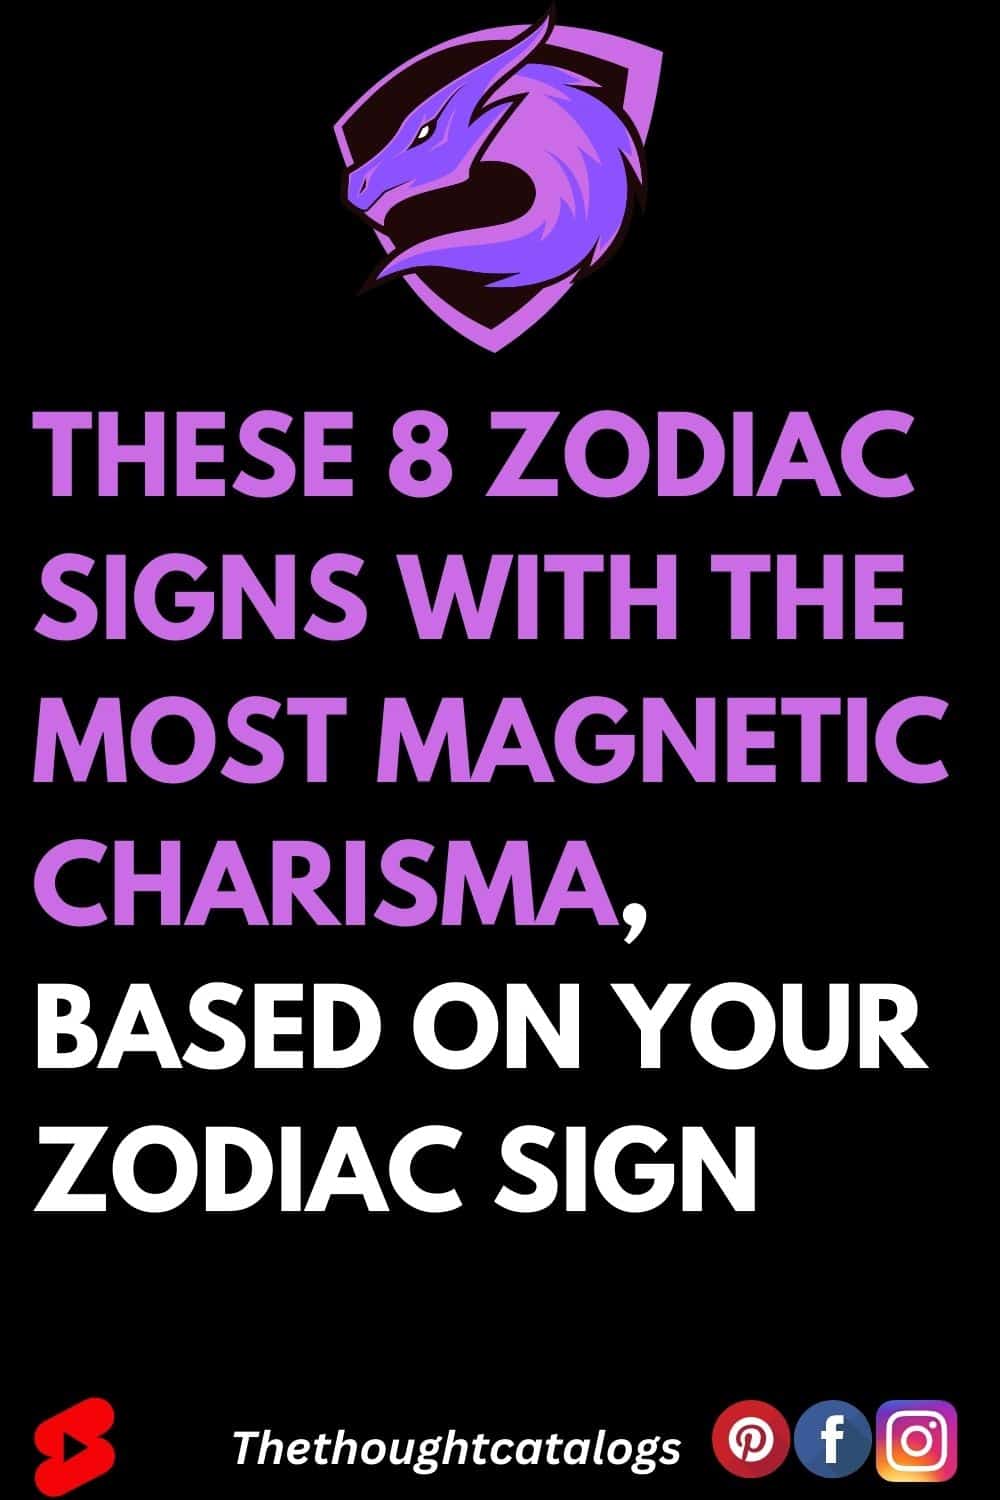 These 8 Zodiac Signs with the Most Magnetic Charisma, Based On Your Zodiac Sign